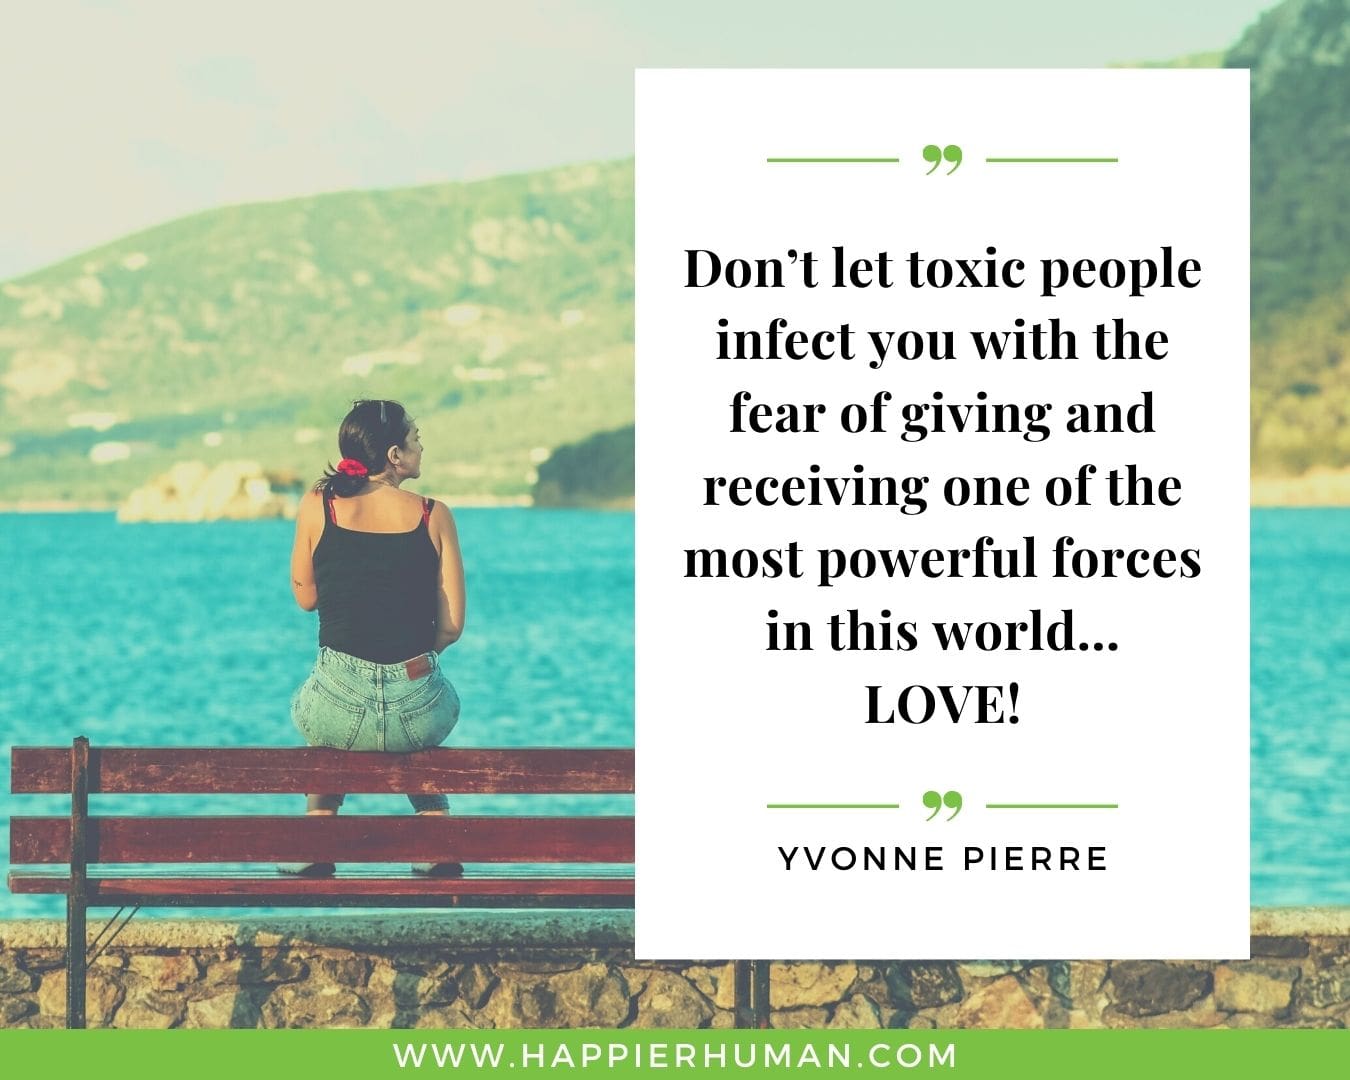 Toxic People Quotes - “Don’t let toxic people infect you with the fear of giving and receiving one of the most powerful forces in this world… LOVE!” – Yvonne Pierre